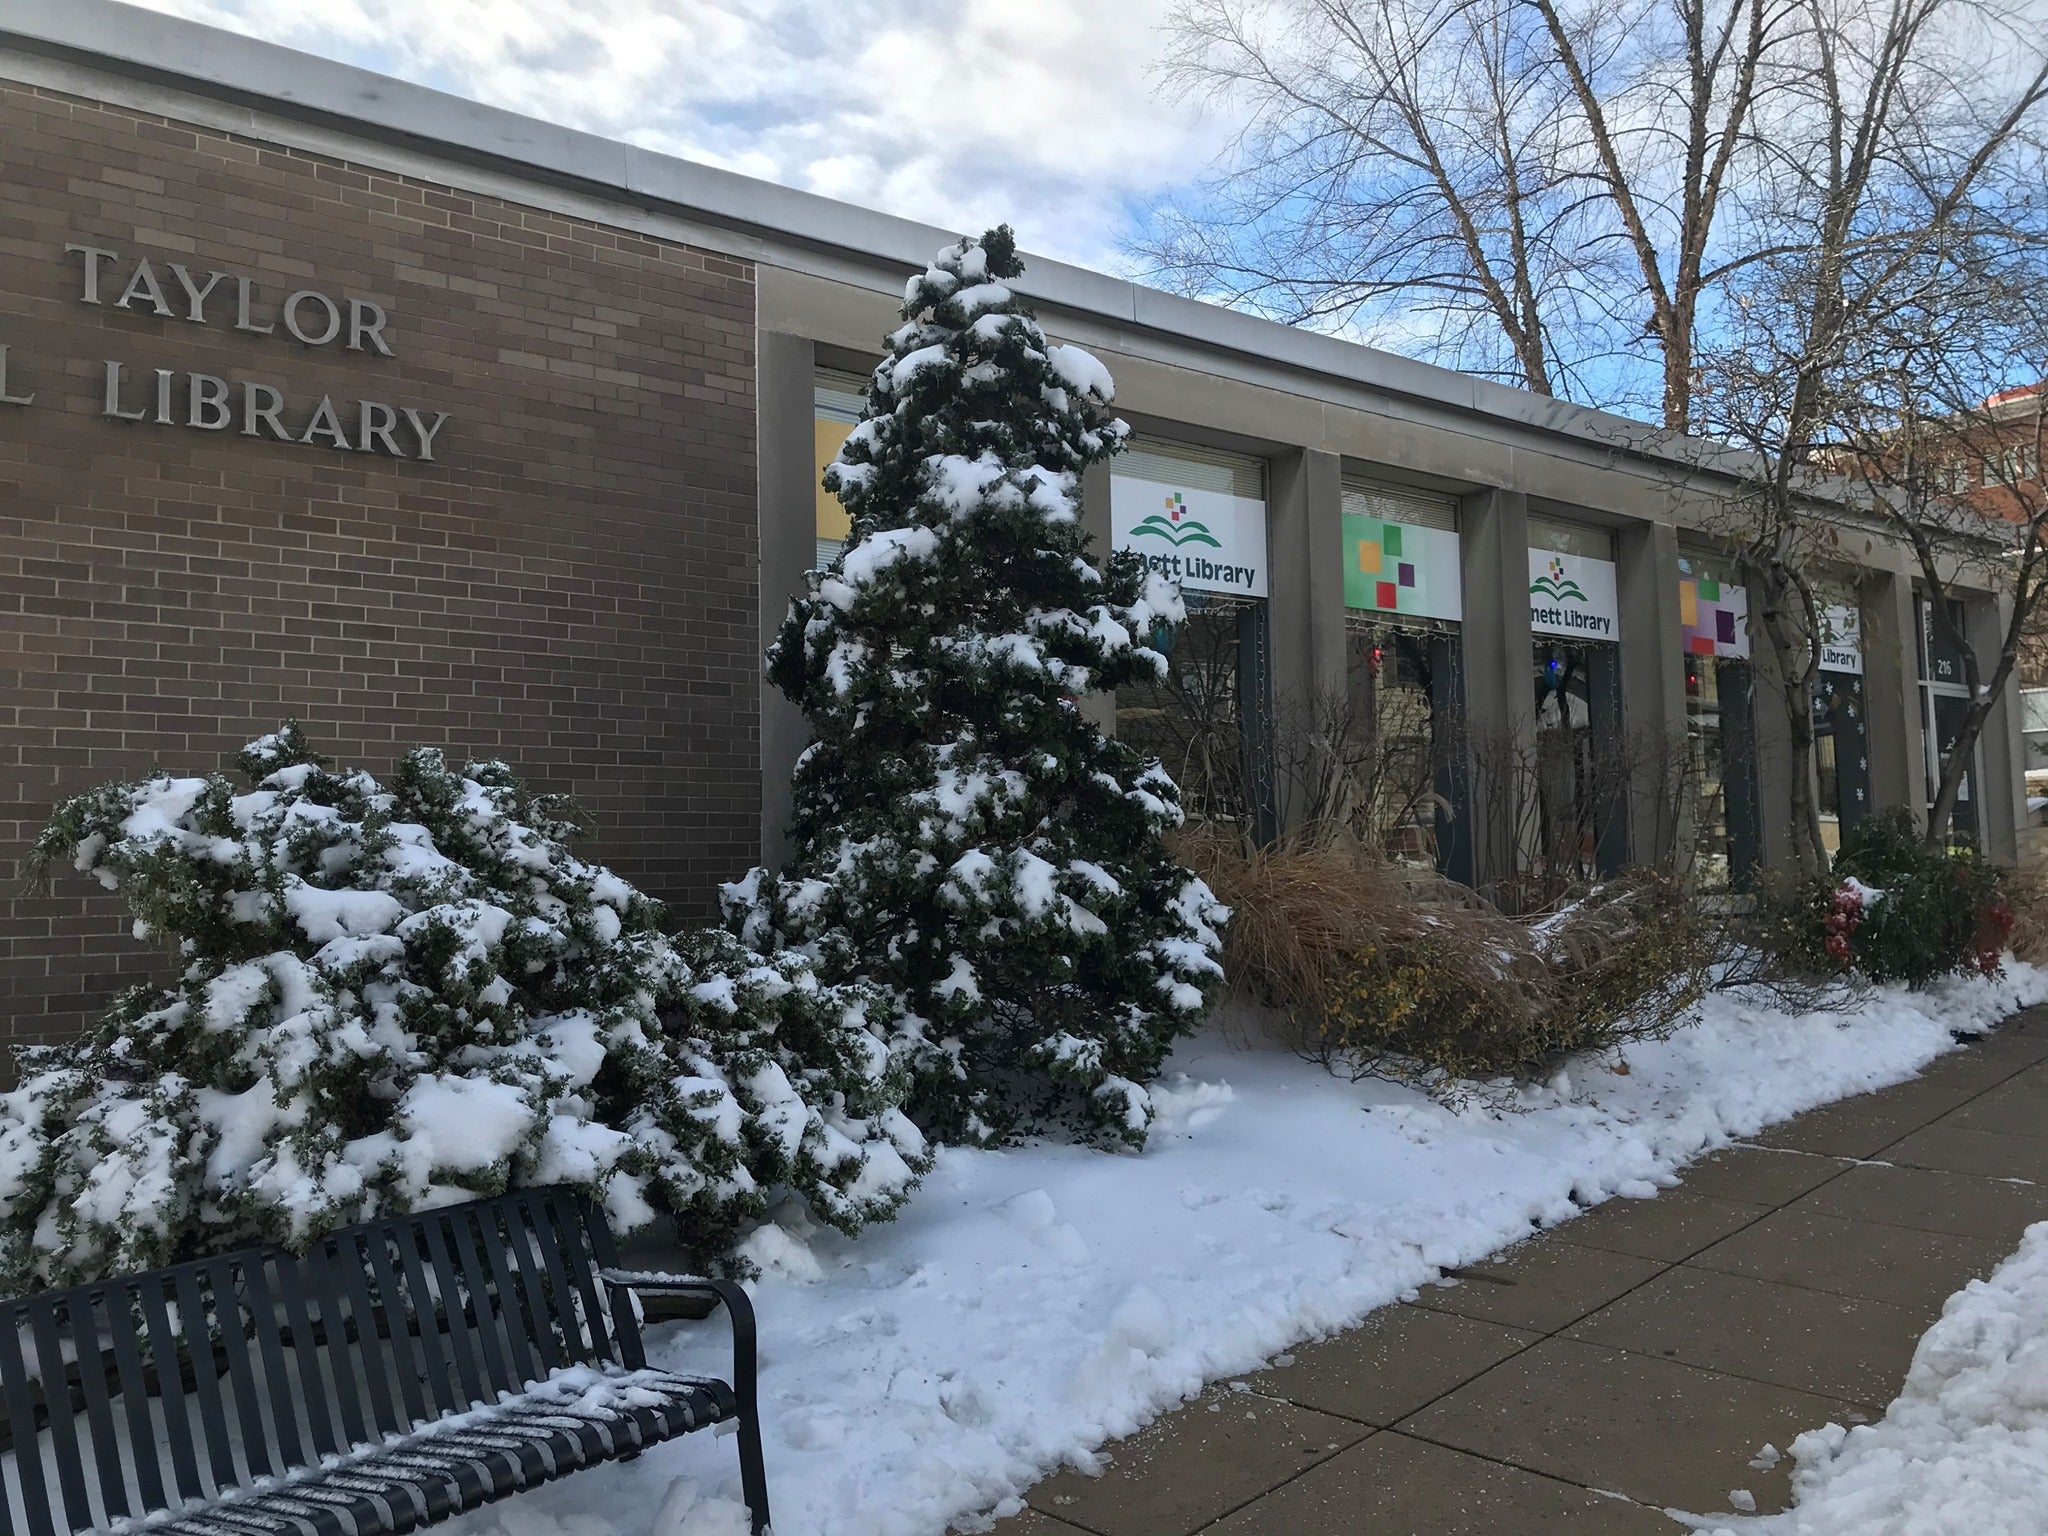 The exterior of Kennett Library. surrounded by snow